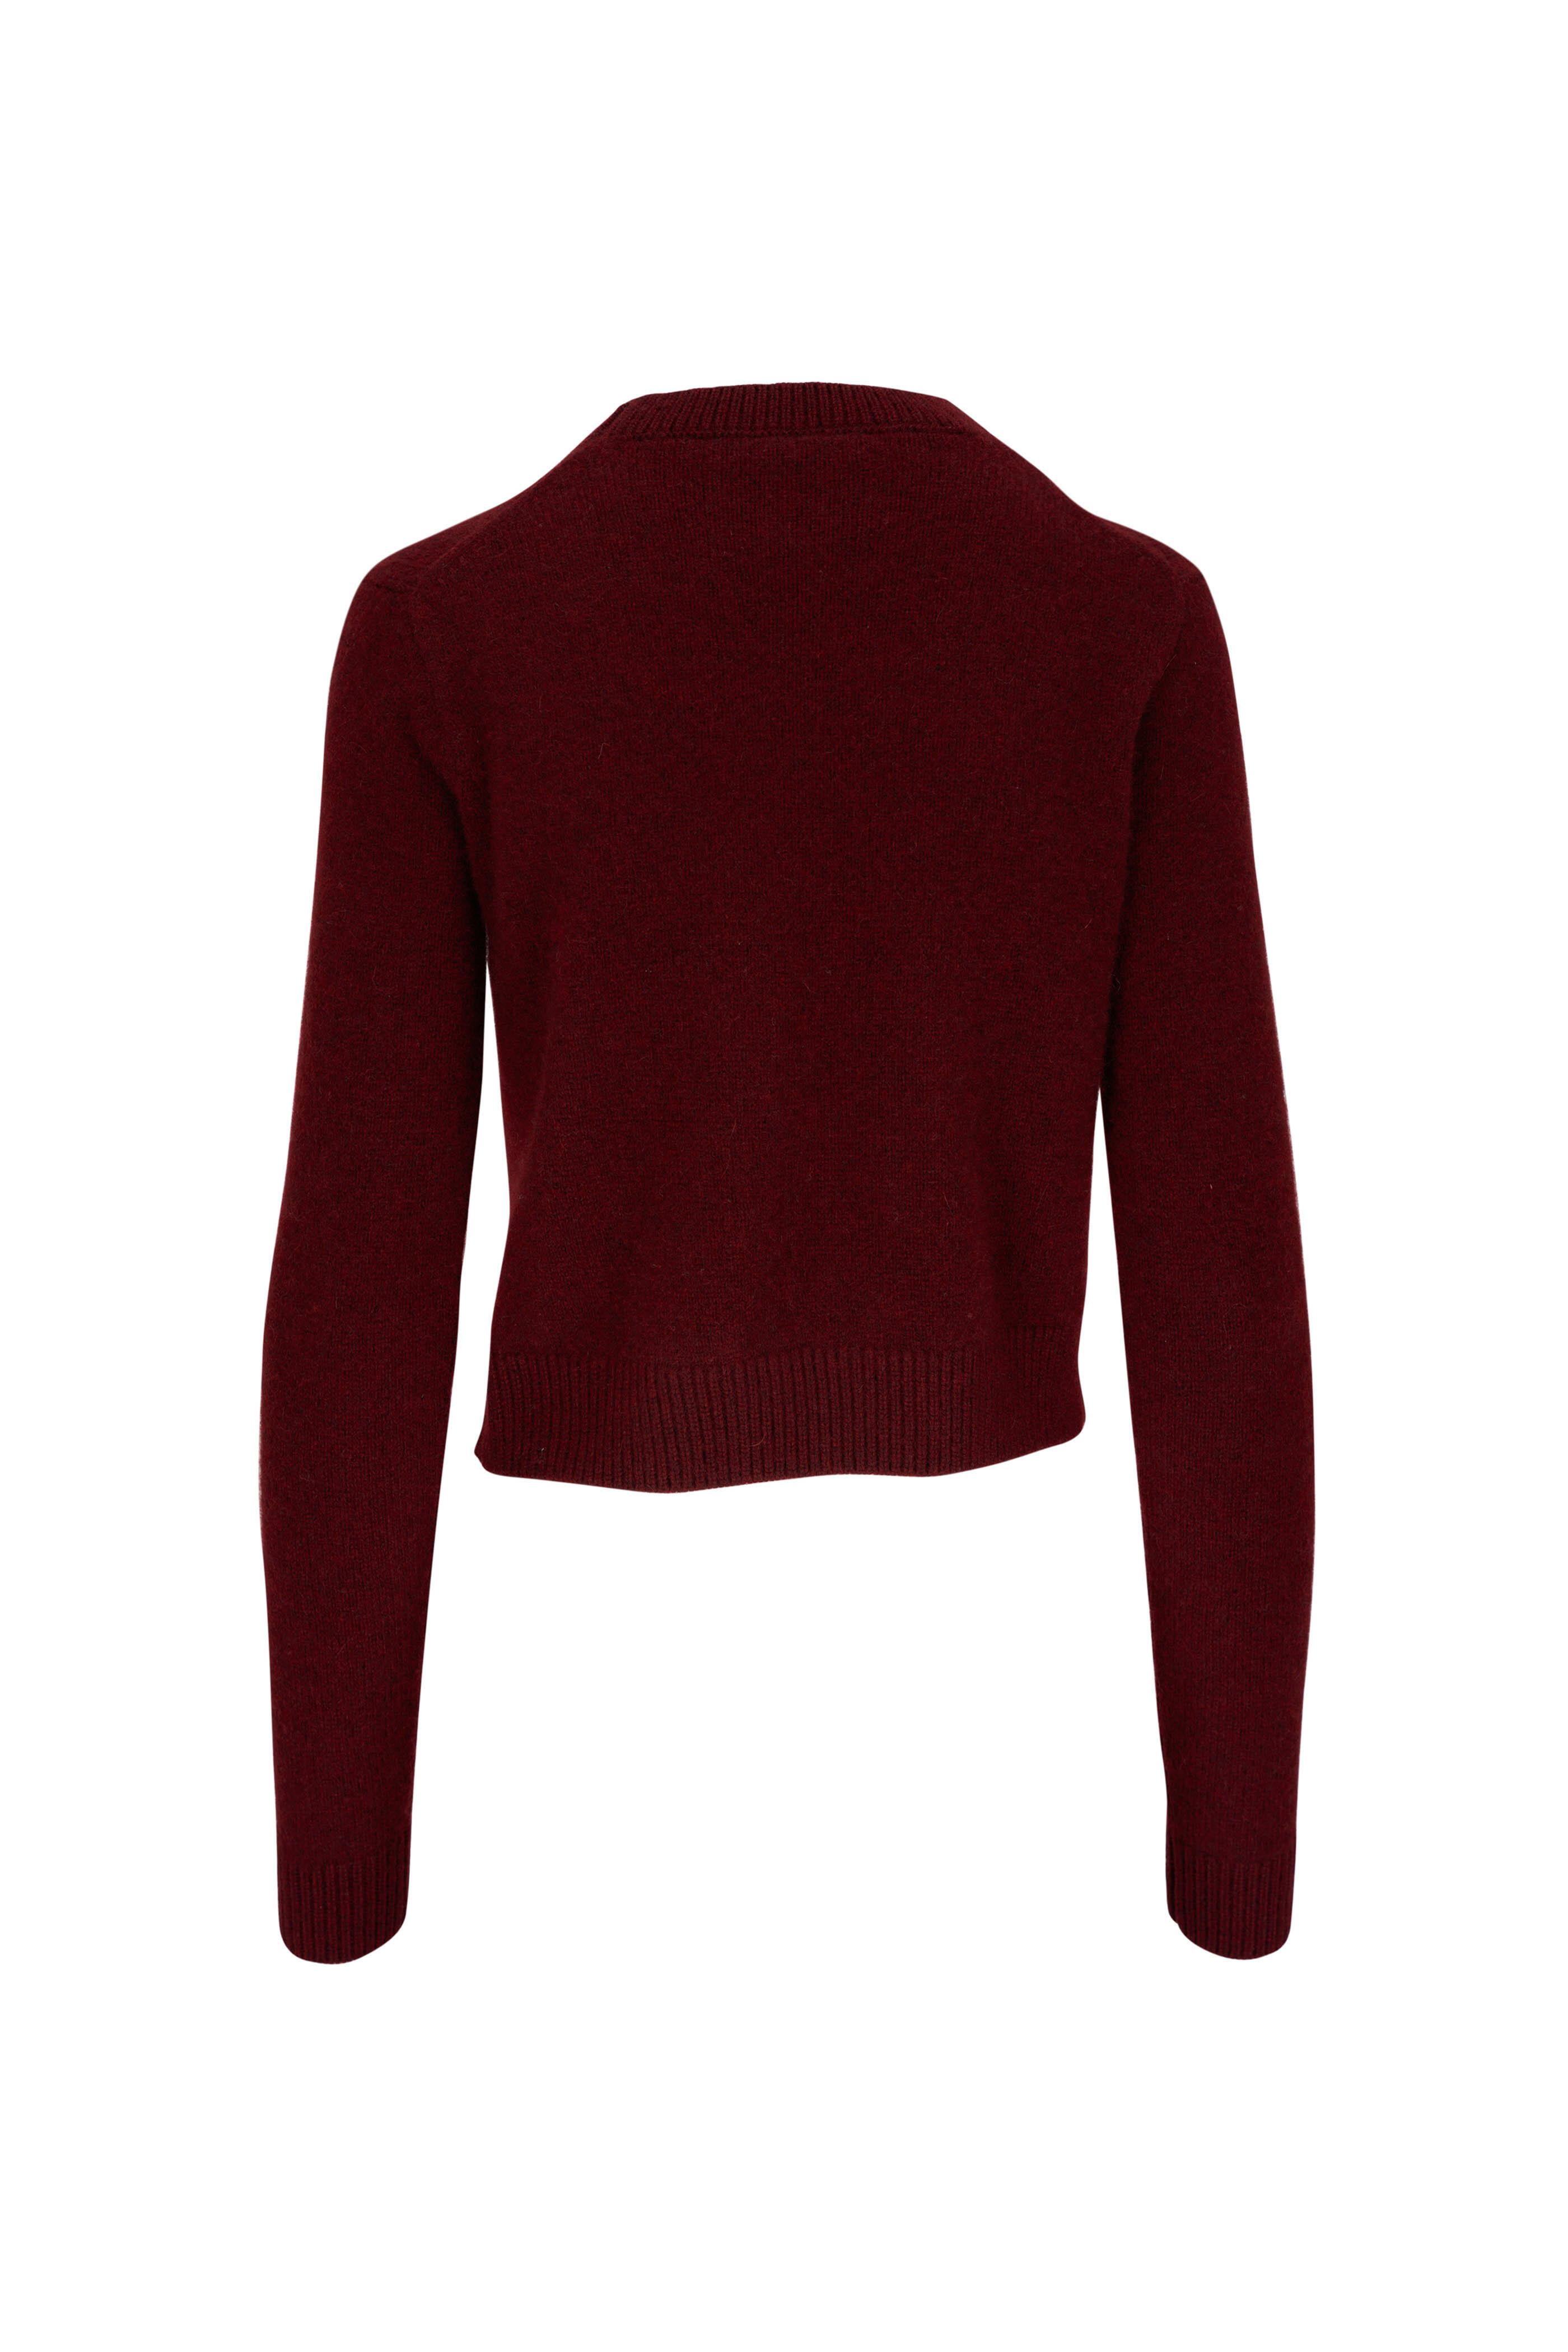 The Elder Statesman Women's Maroon Simple Crewneck Cashmere Sweater | M by Mitchell Stores